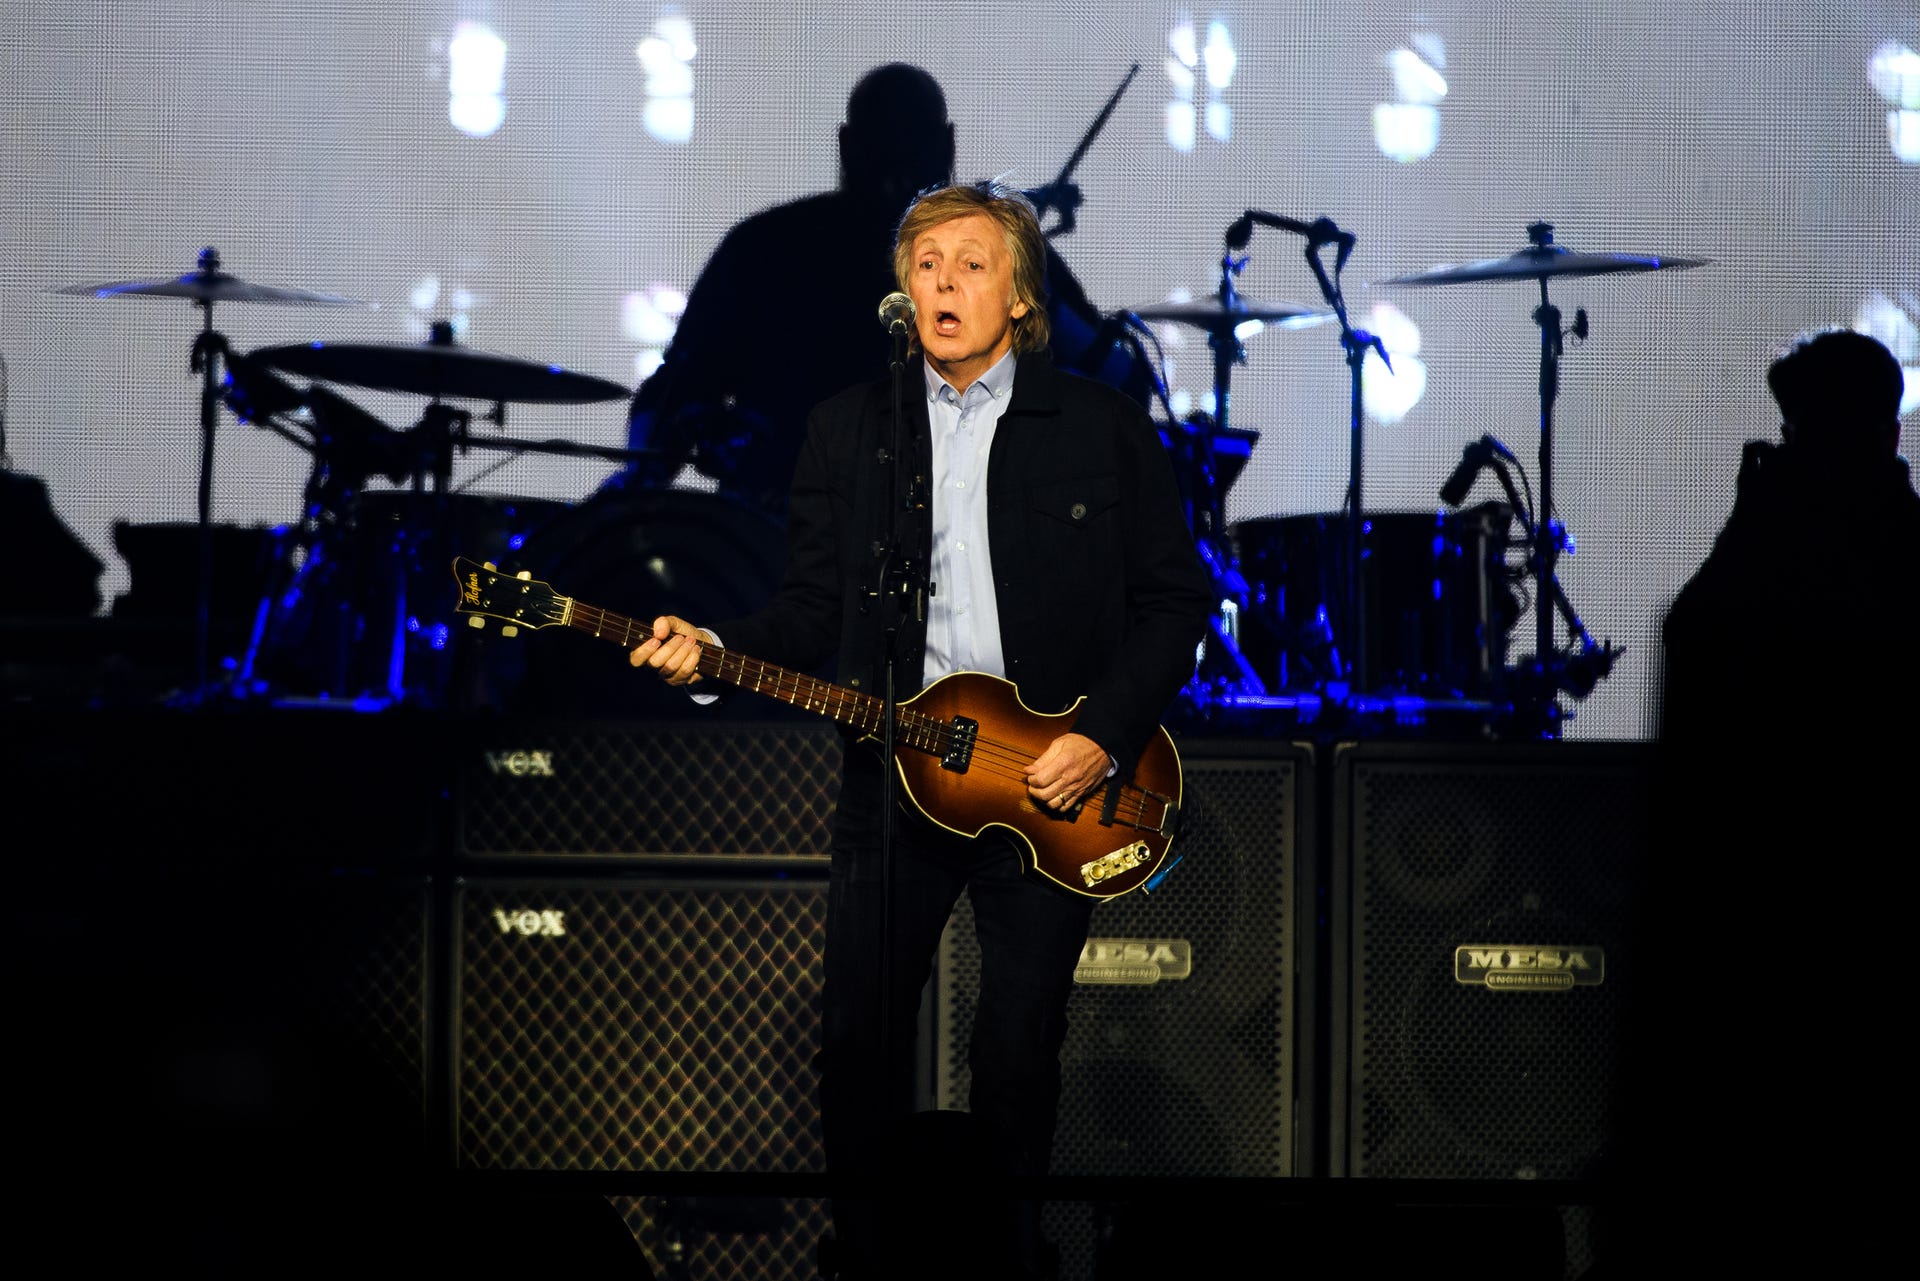 Paul McCartney performs in Greenville on his Freshen Up tour at the Bon Secours Wellness Arena Thursday, May 30, 2019.